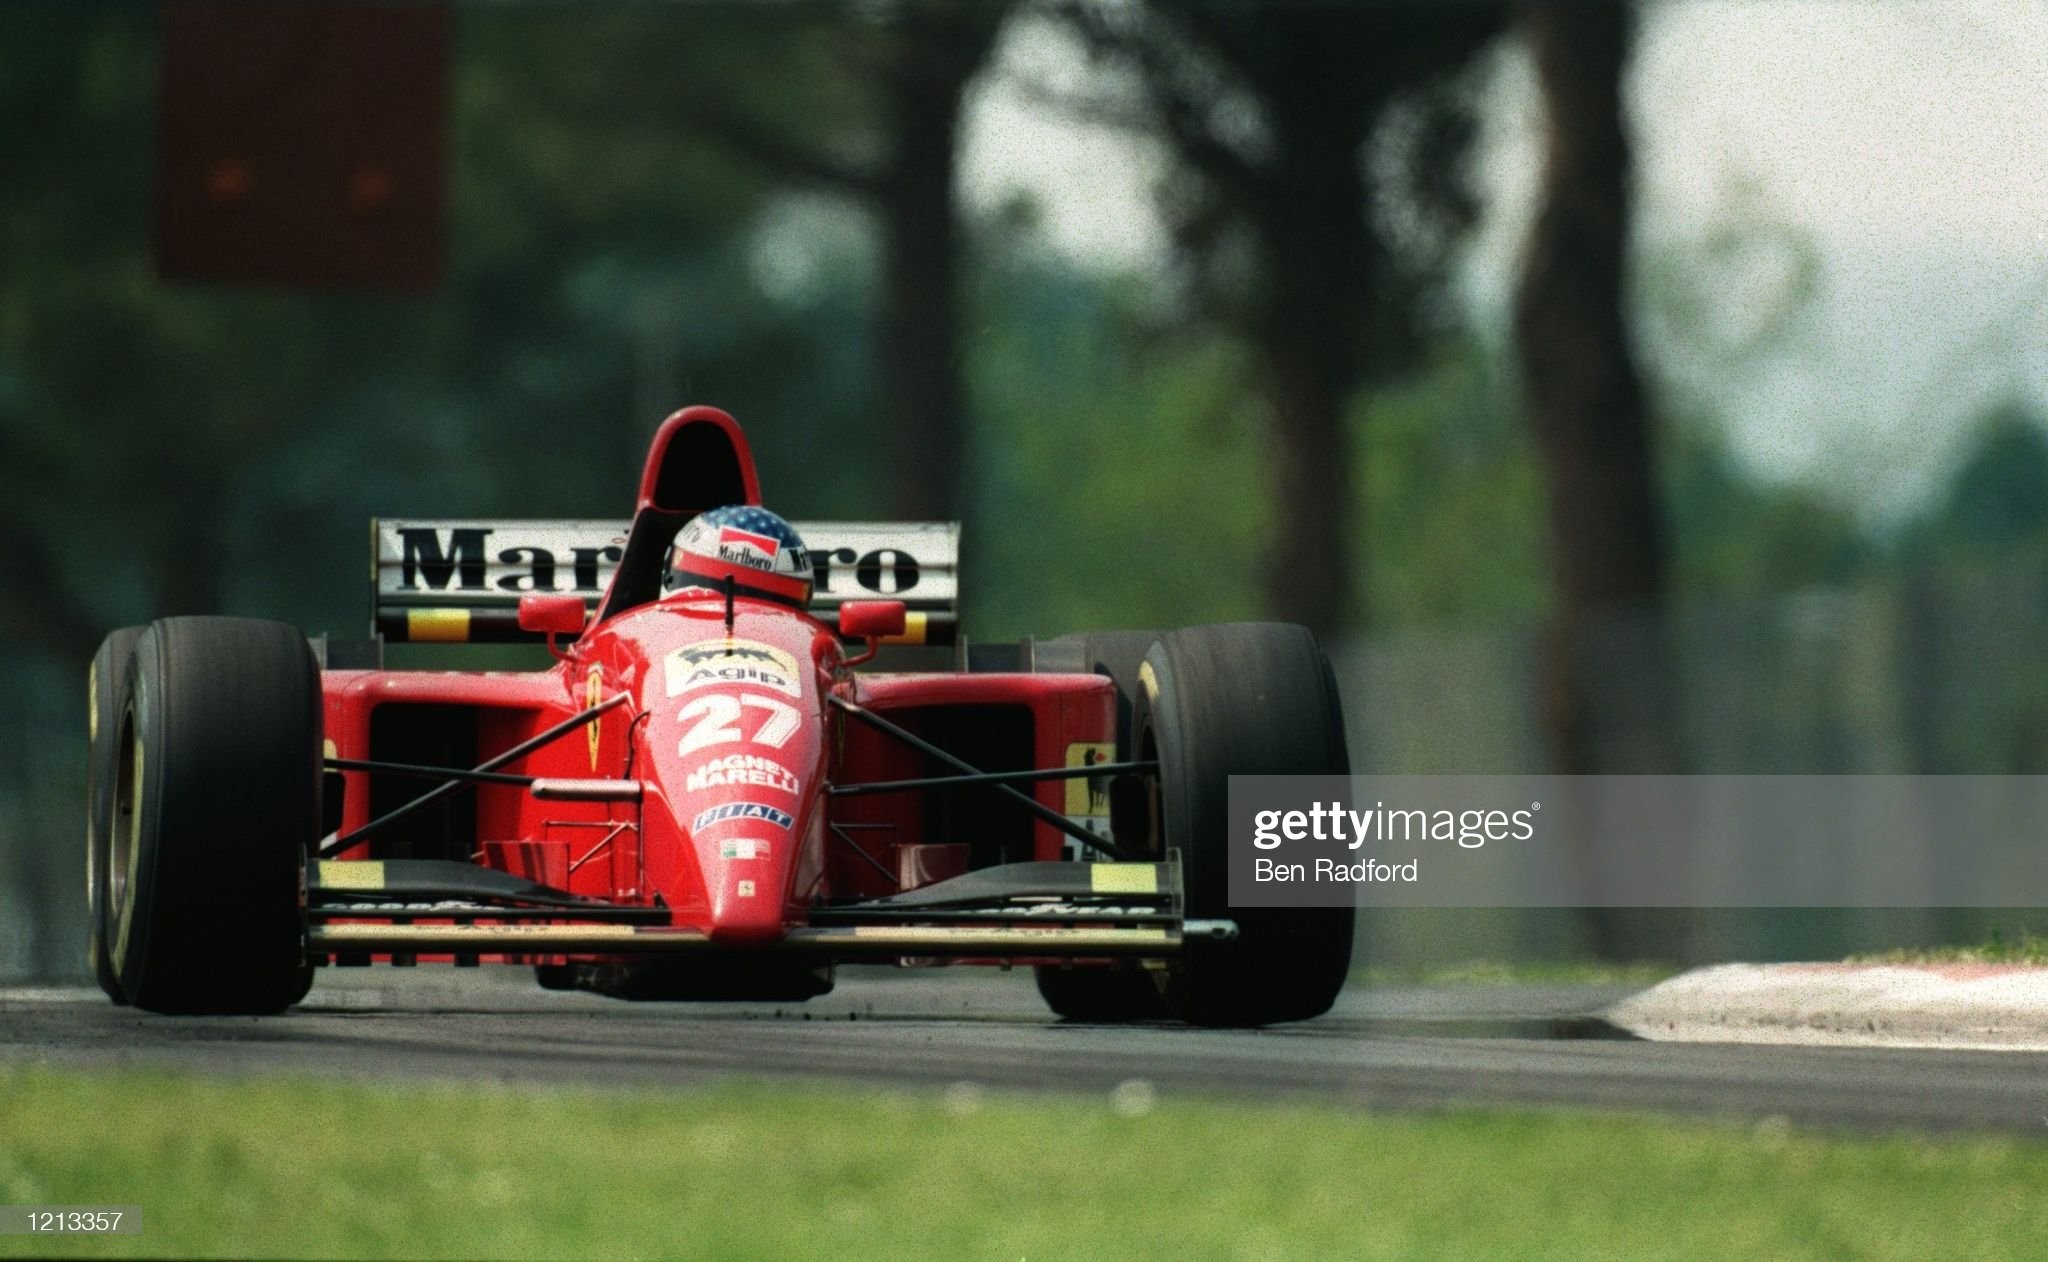 Jean Alesi drives his Ferrari during the final qualifying session in the San Marino F1 Grand Prix in Imola on 29 April 1995. 